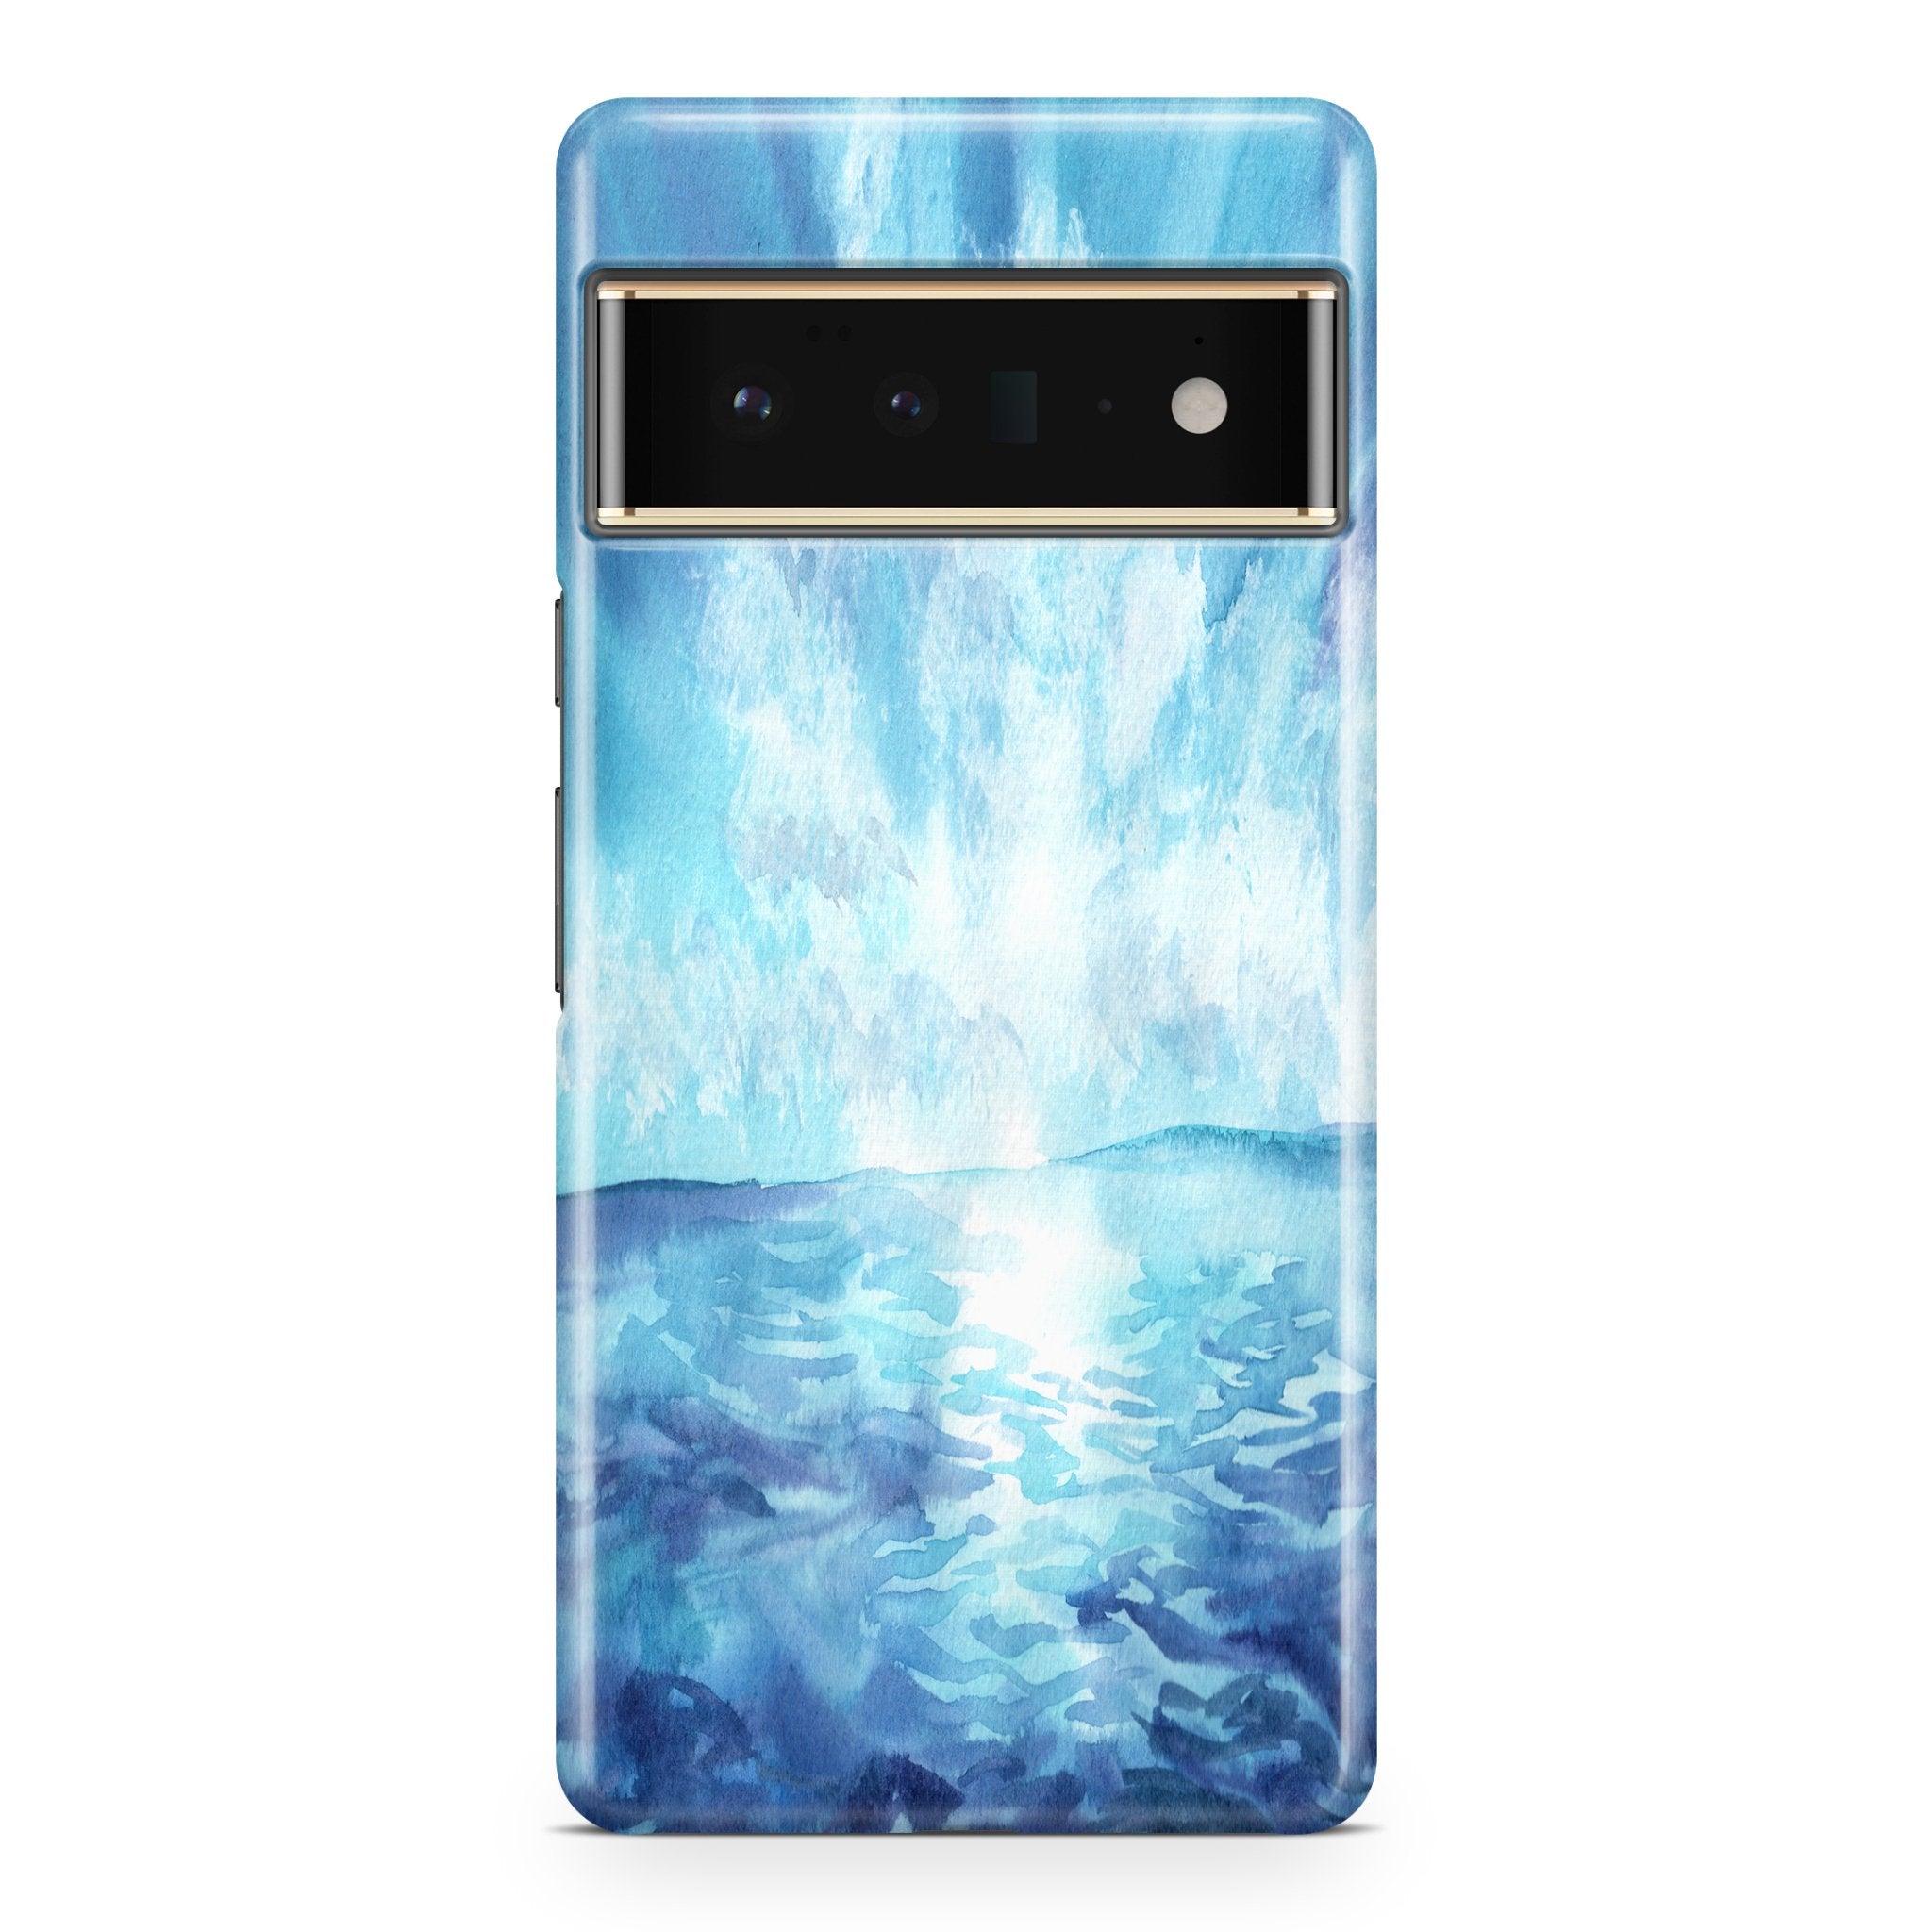 Blue Watercolor Sunrise - Google phone case designs by CaseSwagger